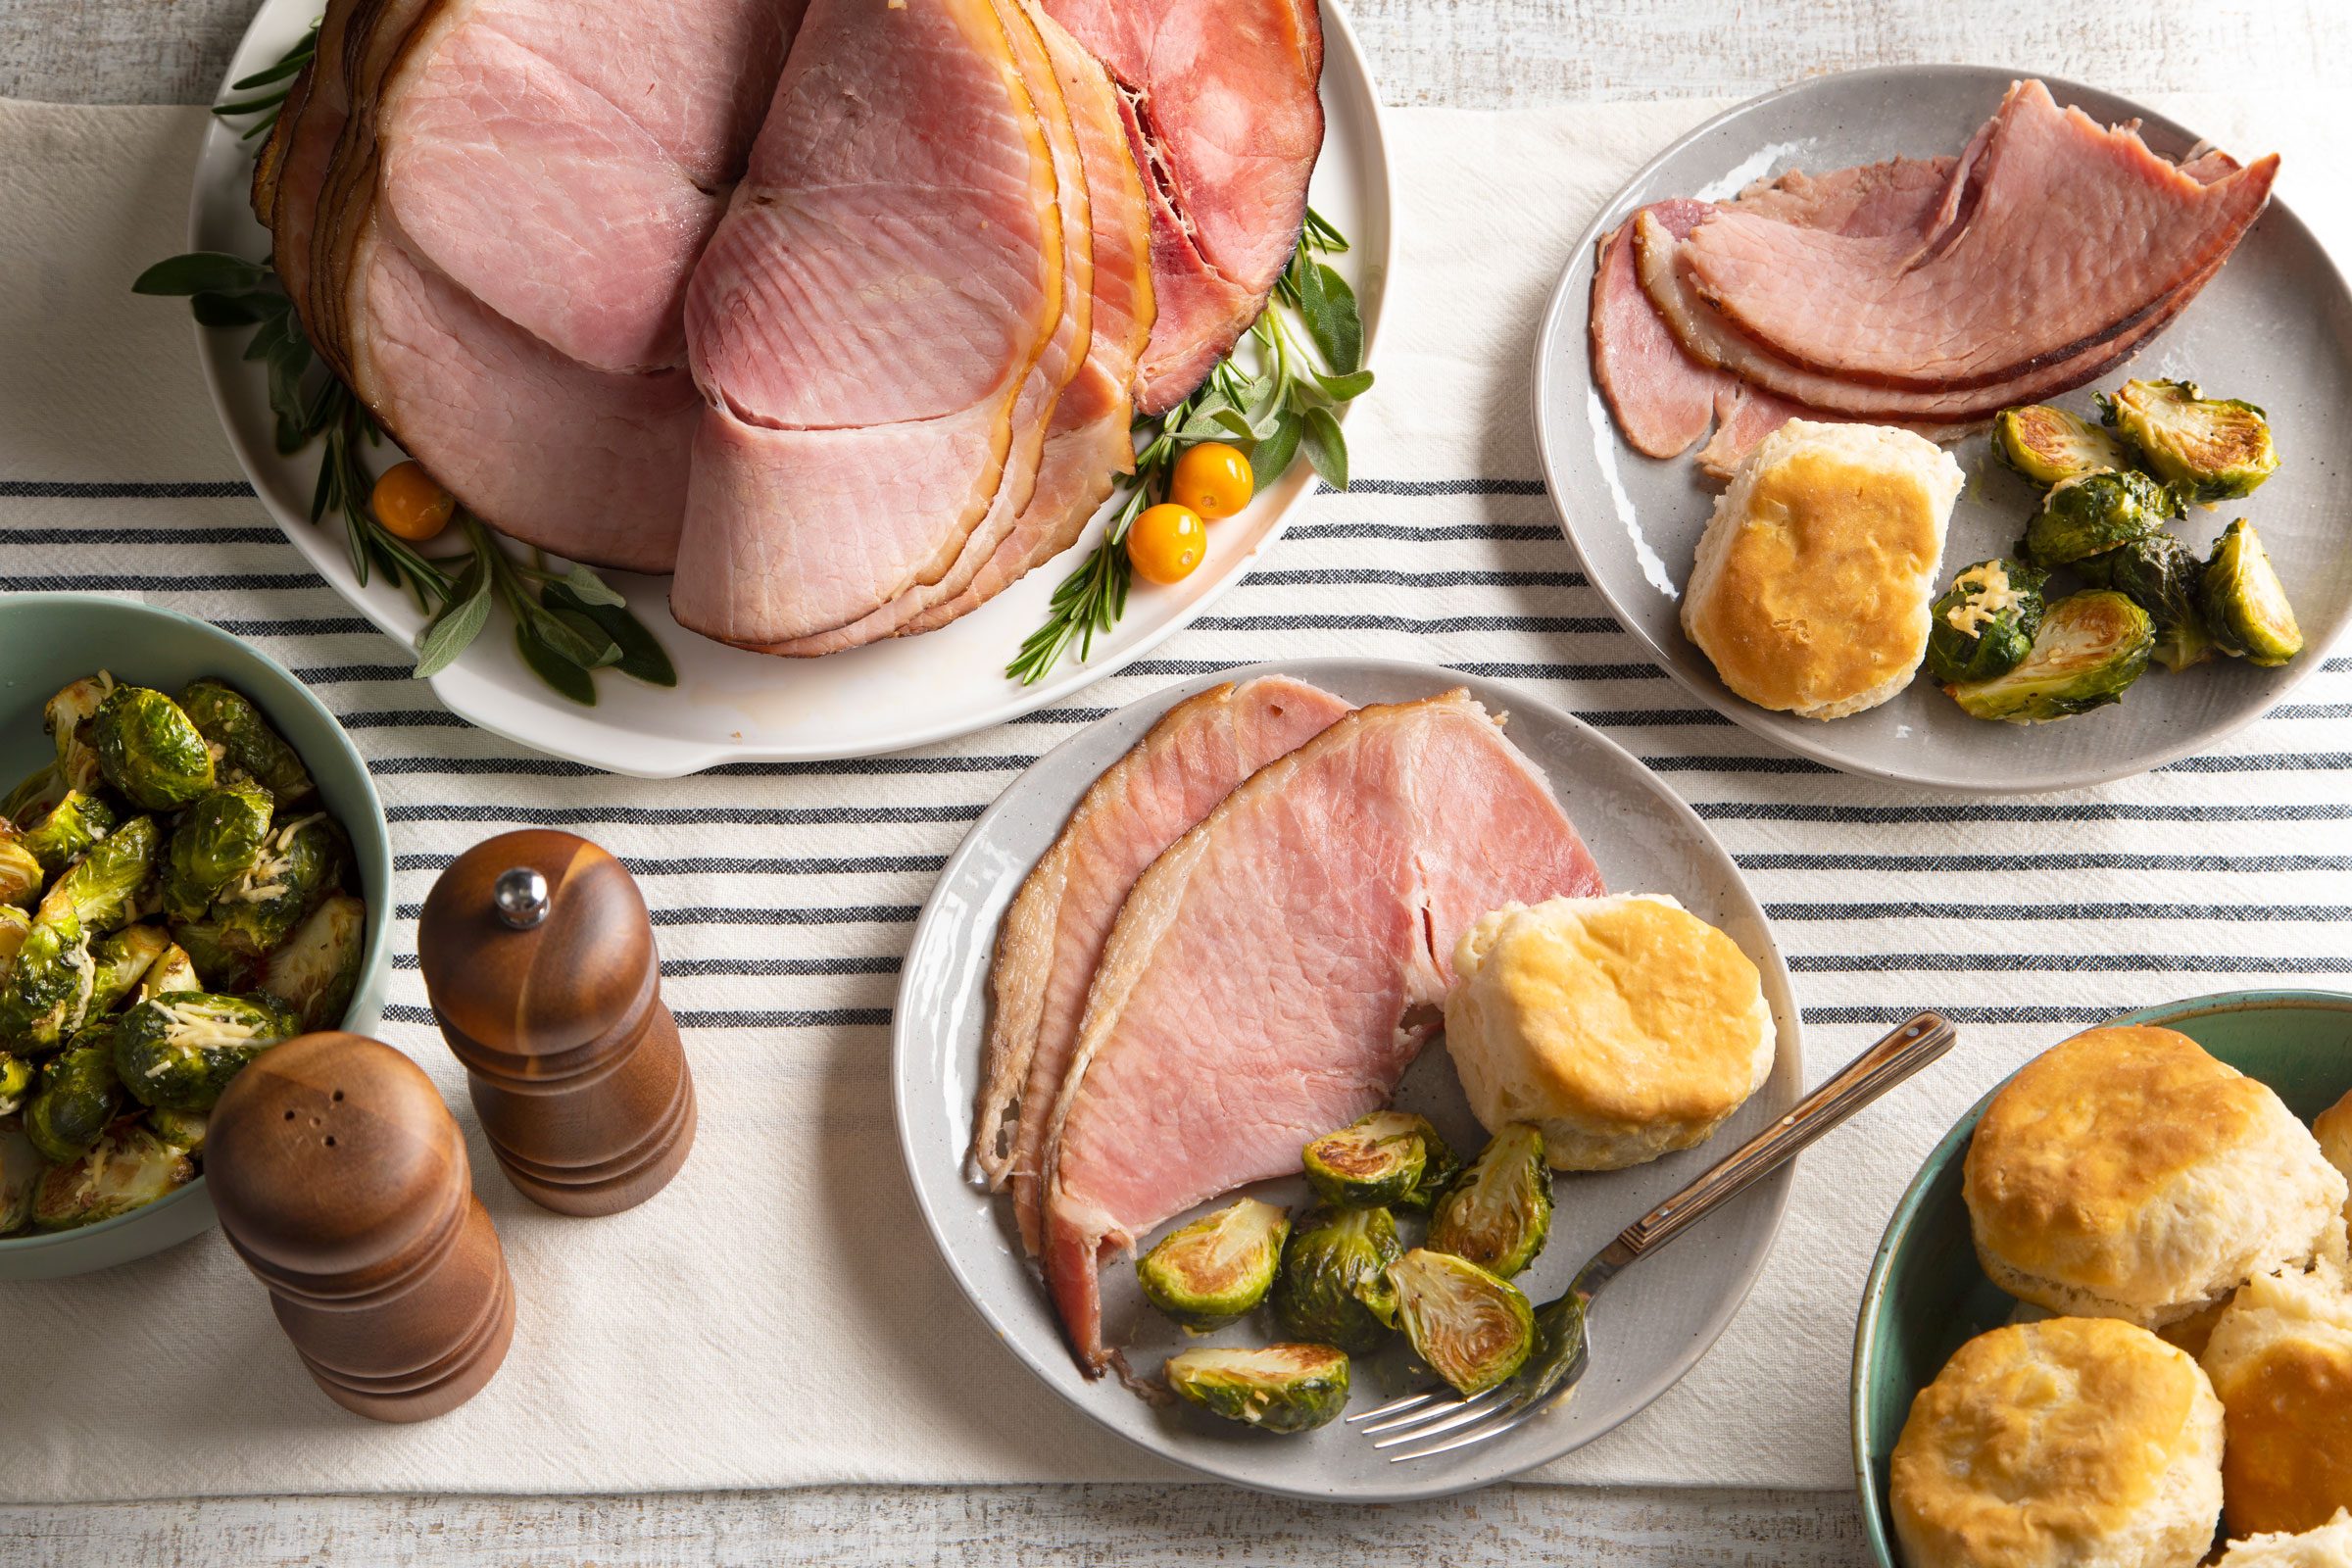 Baked Spiral Ham served on two small plates with a side of brussel sprouts and rolls